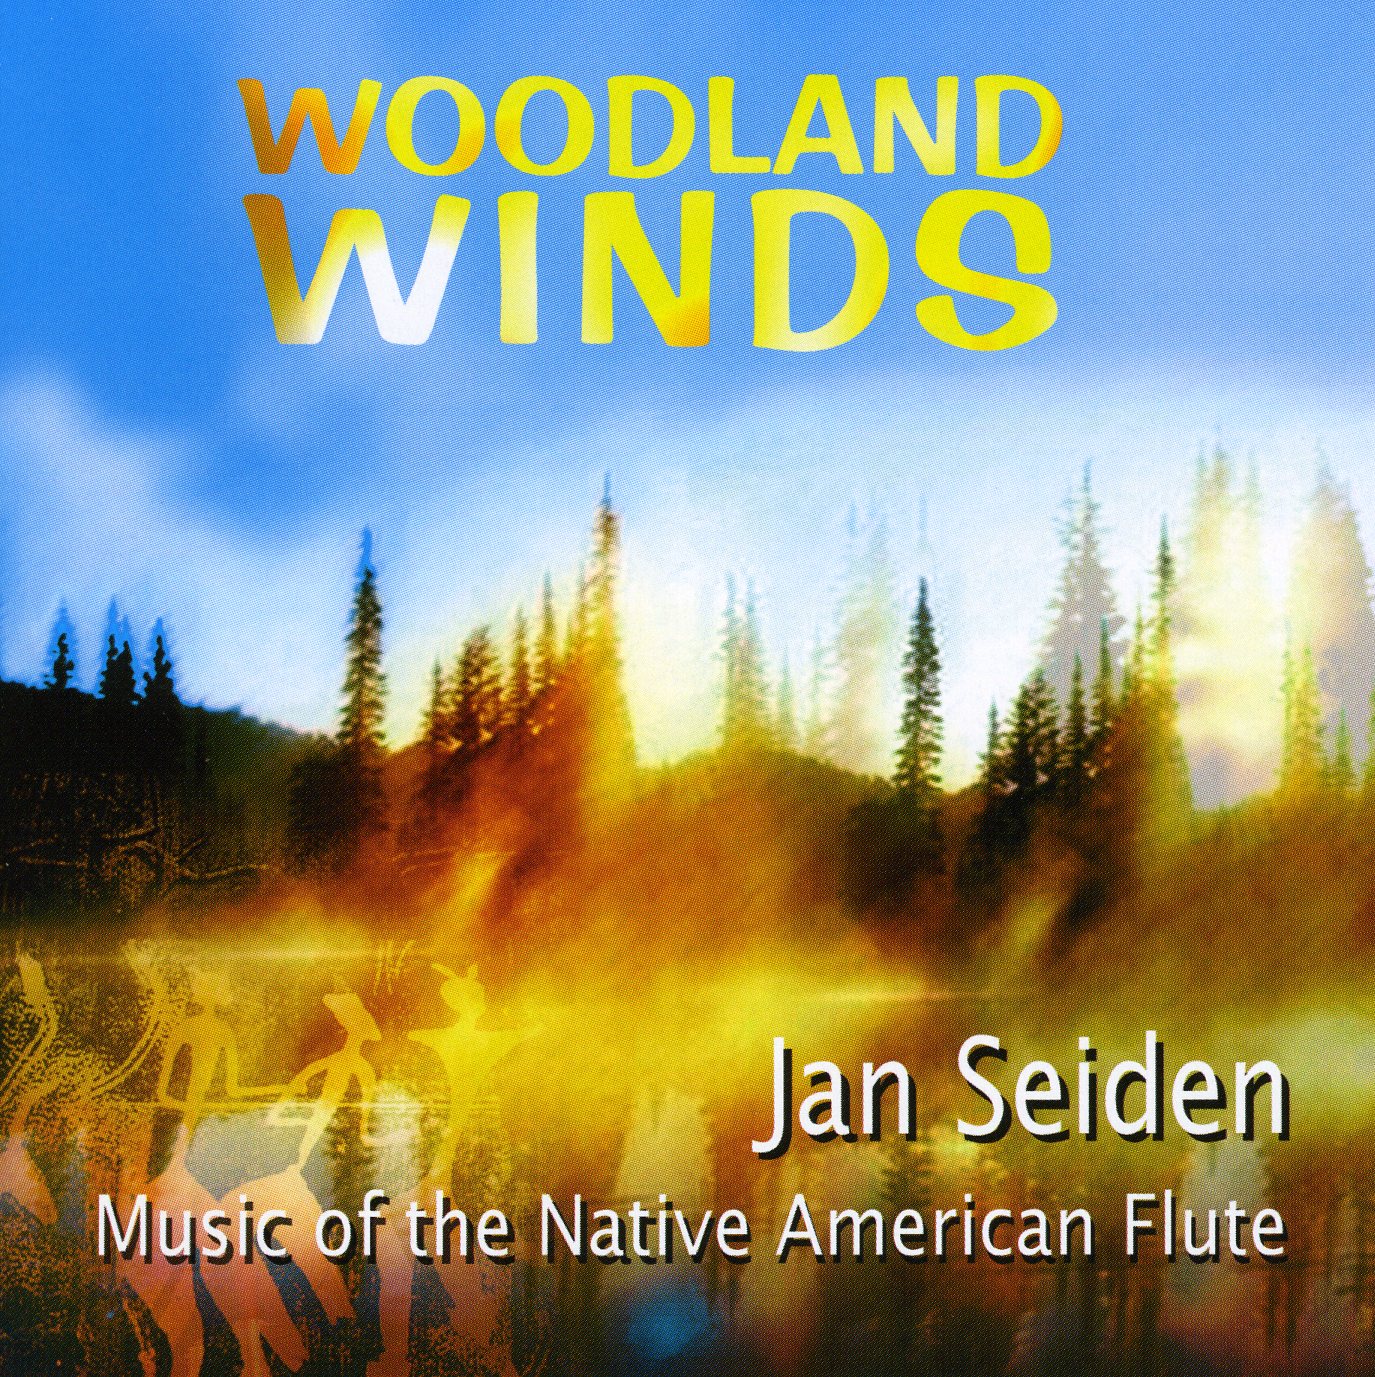 WOODLAND WINDS: MUSIC OF THE NATIVE AMERICAN FLUTE